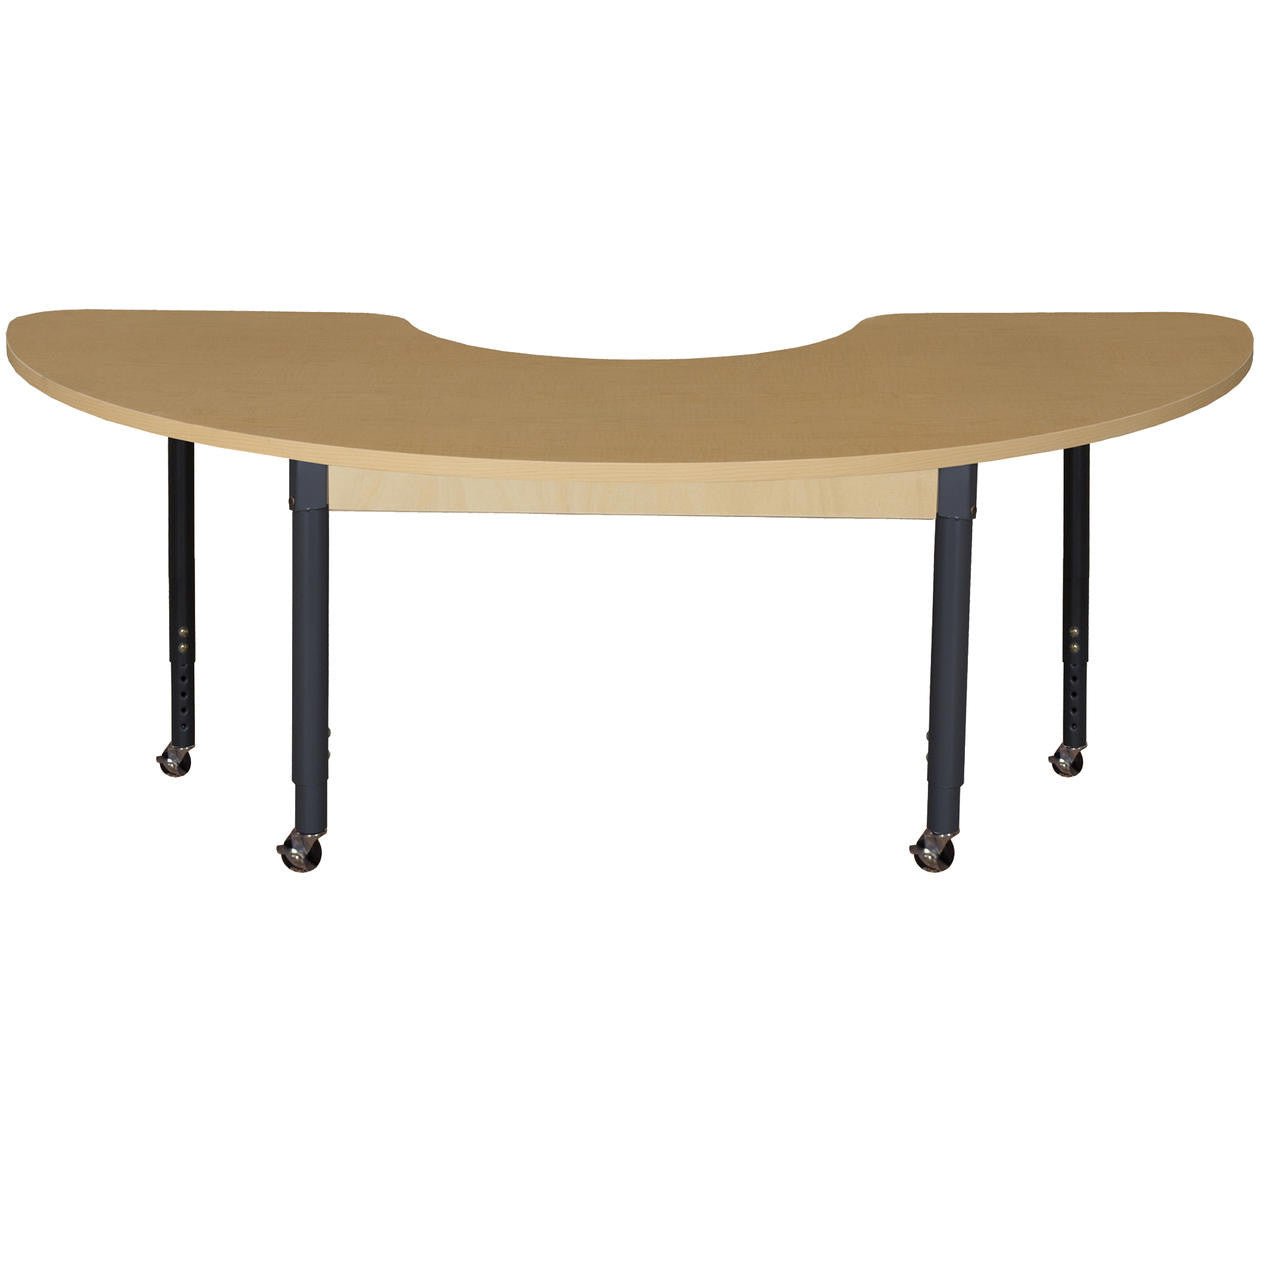 Mobile 24" x 76" Half Circle High Pressure Laminate Table with Adjustable Legs 19-30"